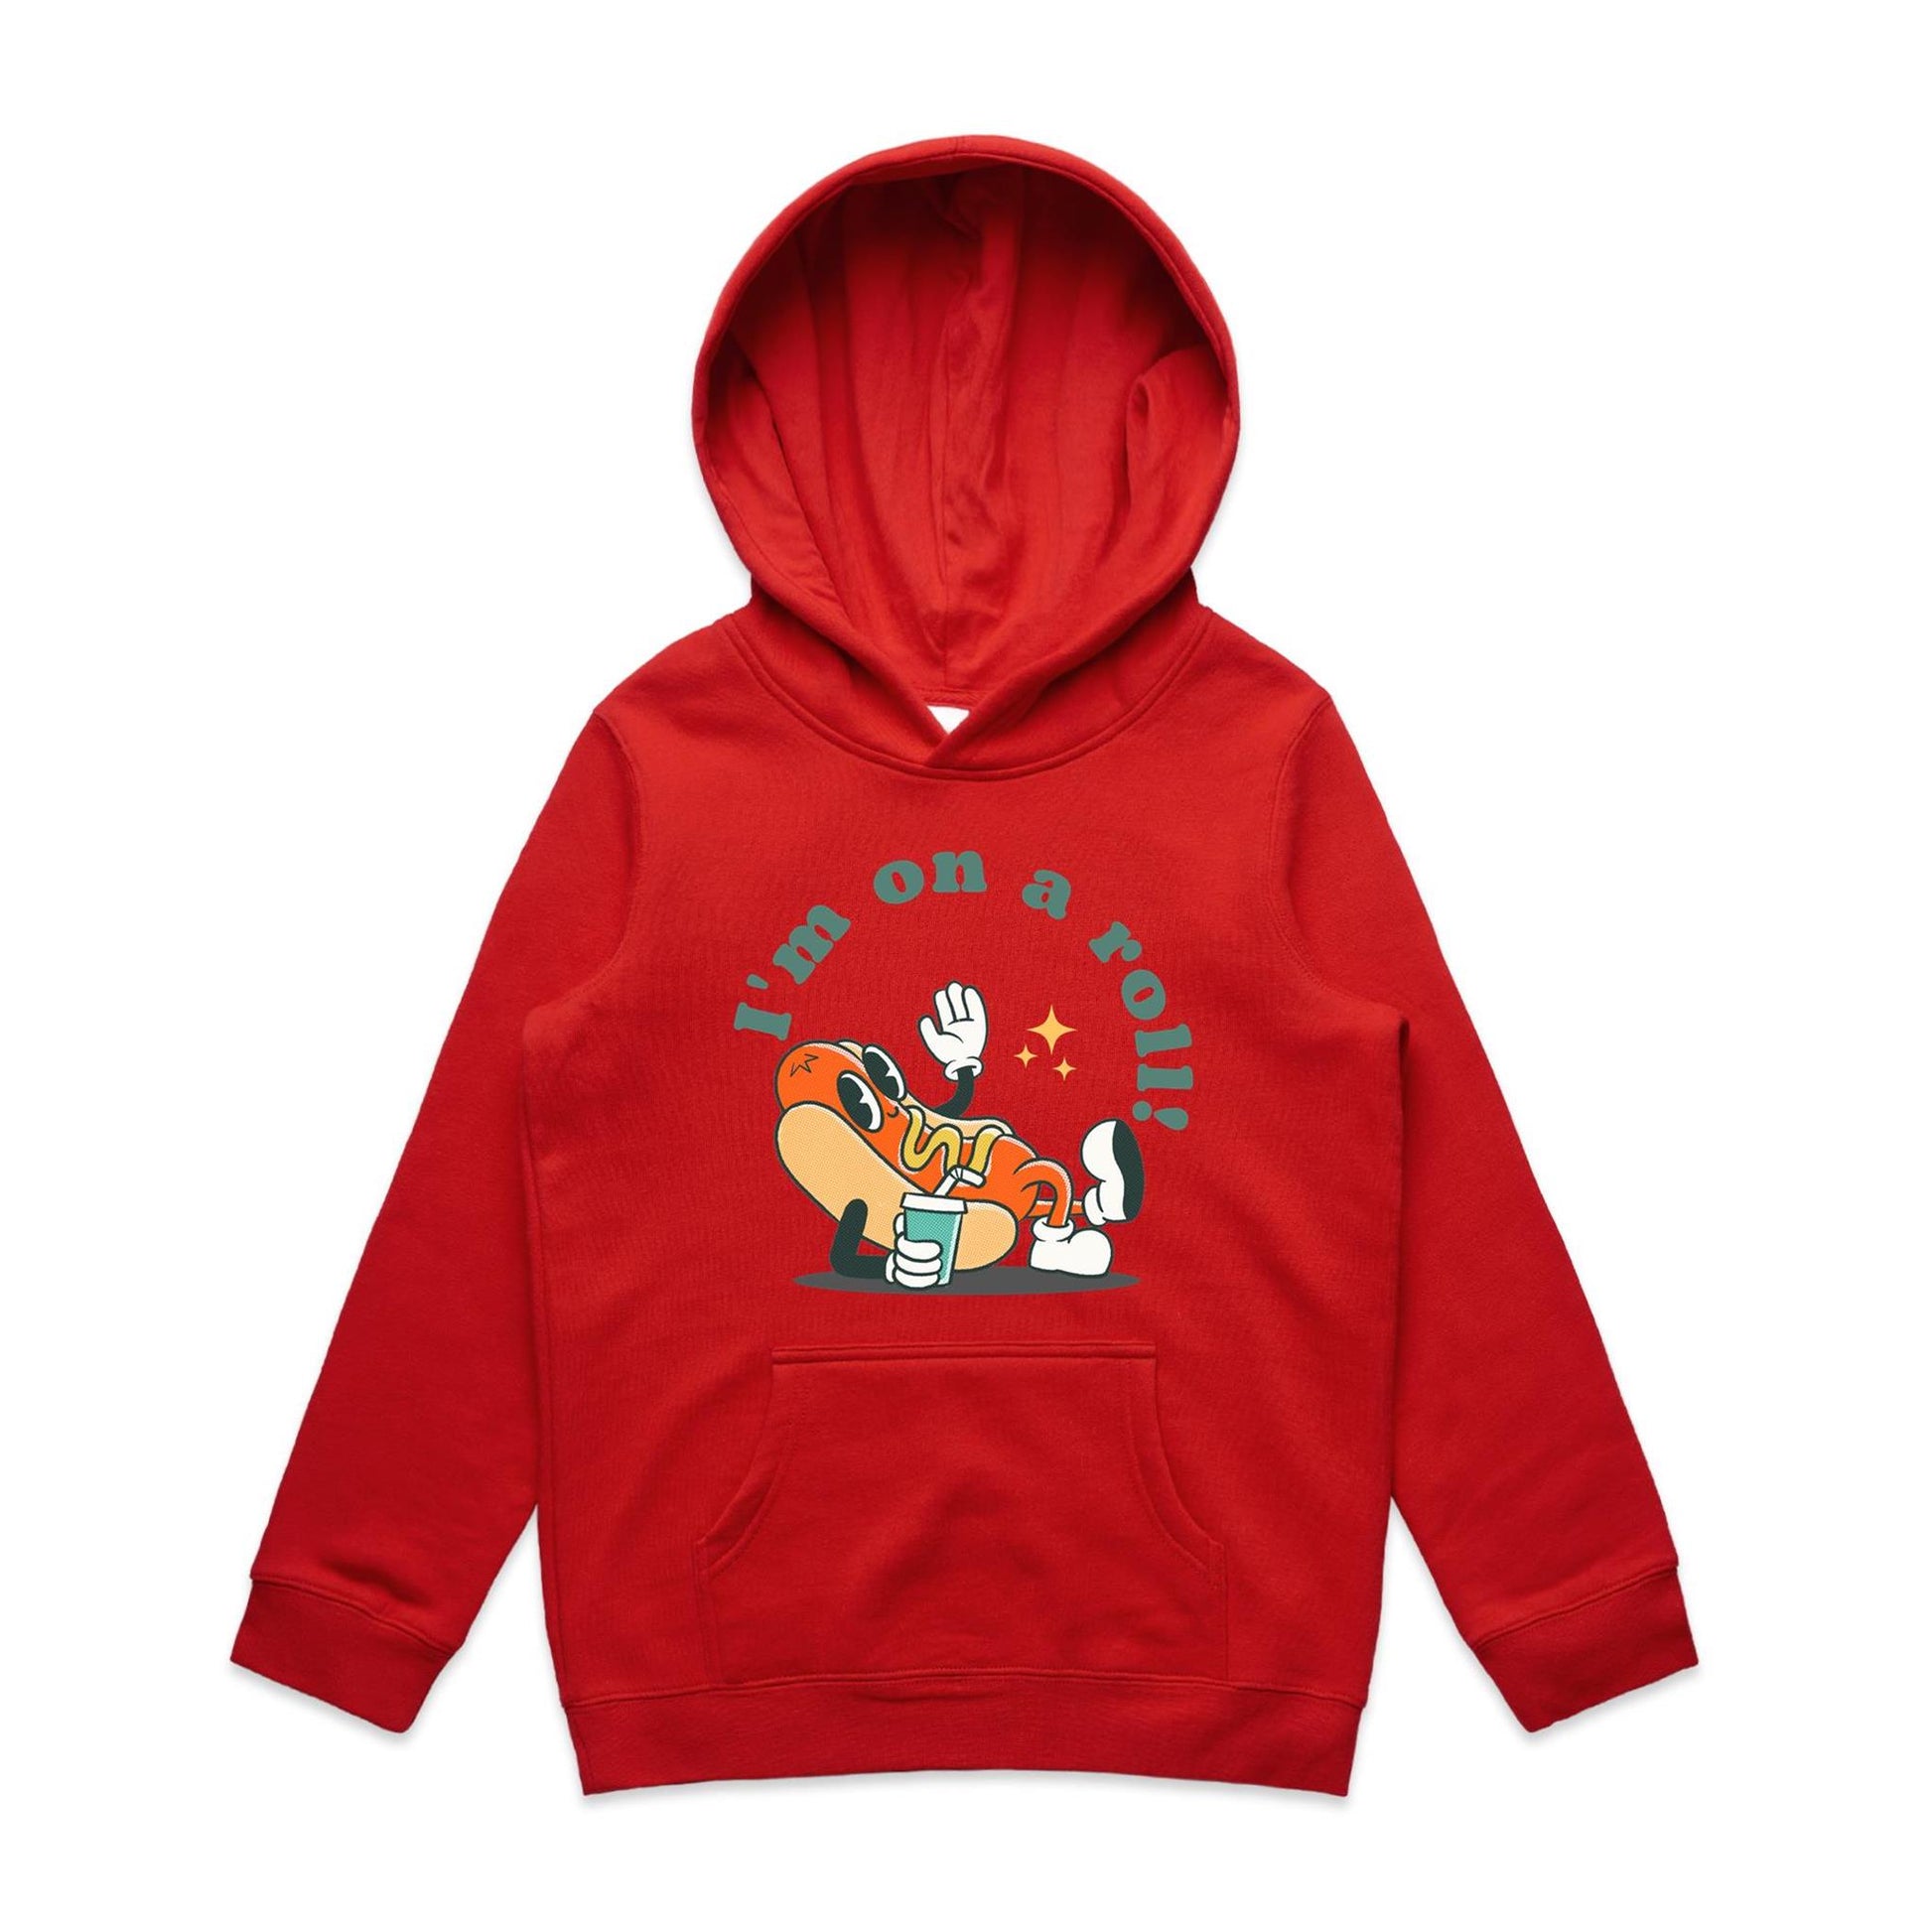 Hot Dog, I'm On A Roll - Youth Supply Hood Red Kids Hoodie Food Retro